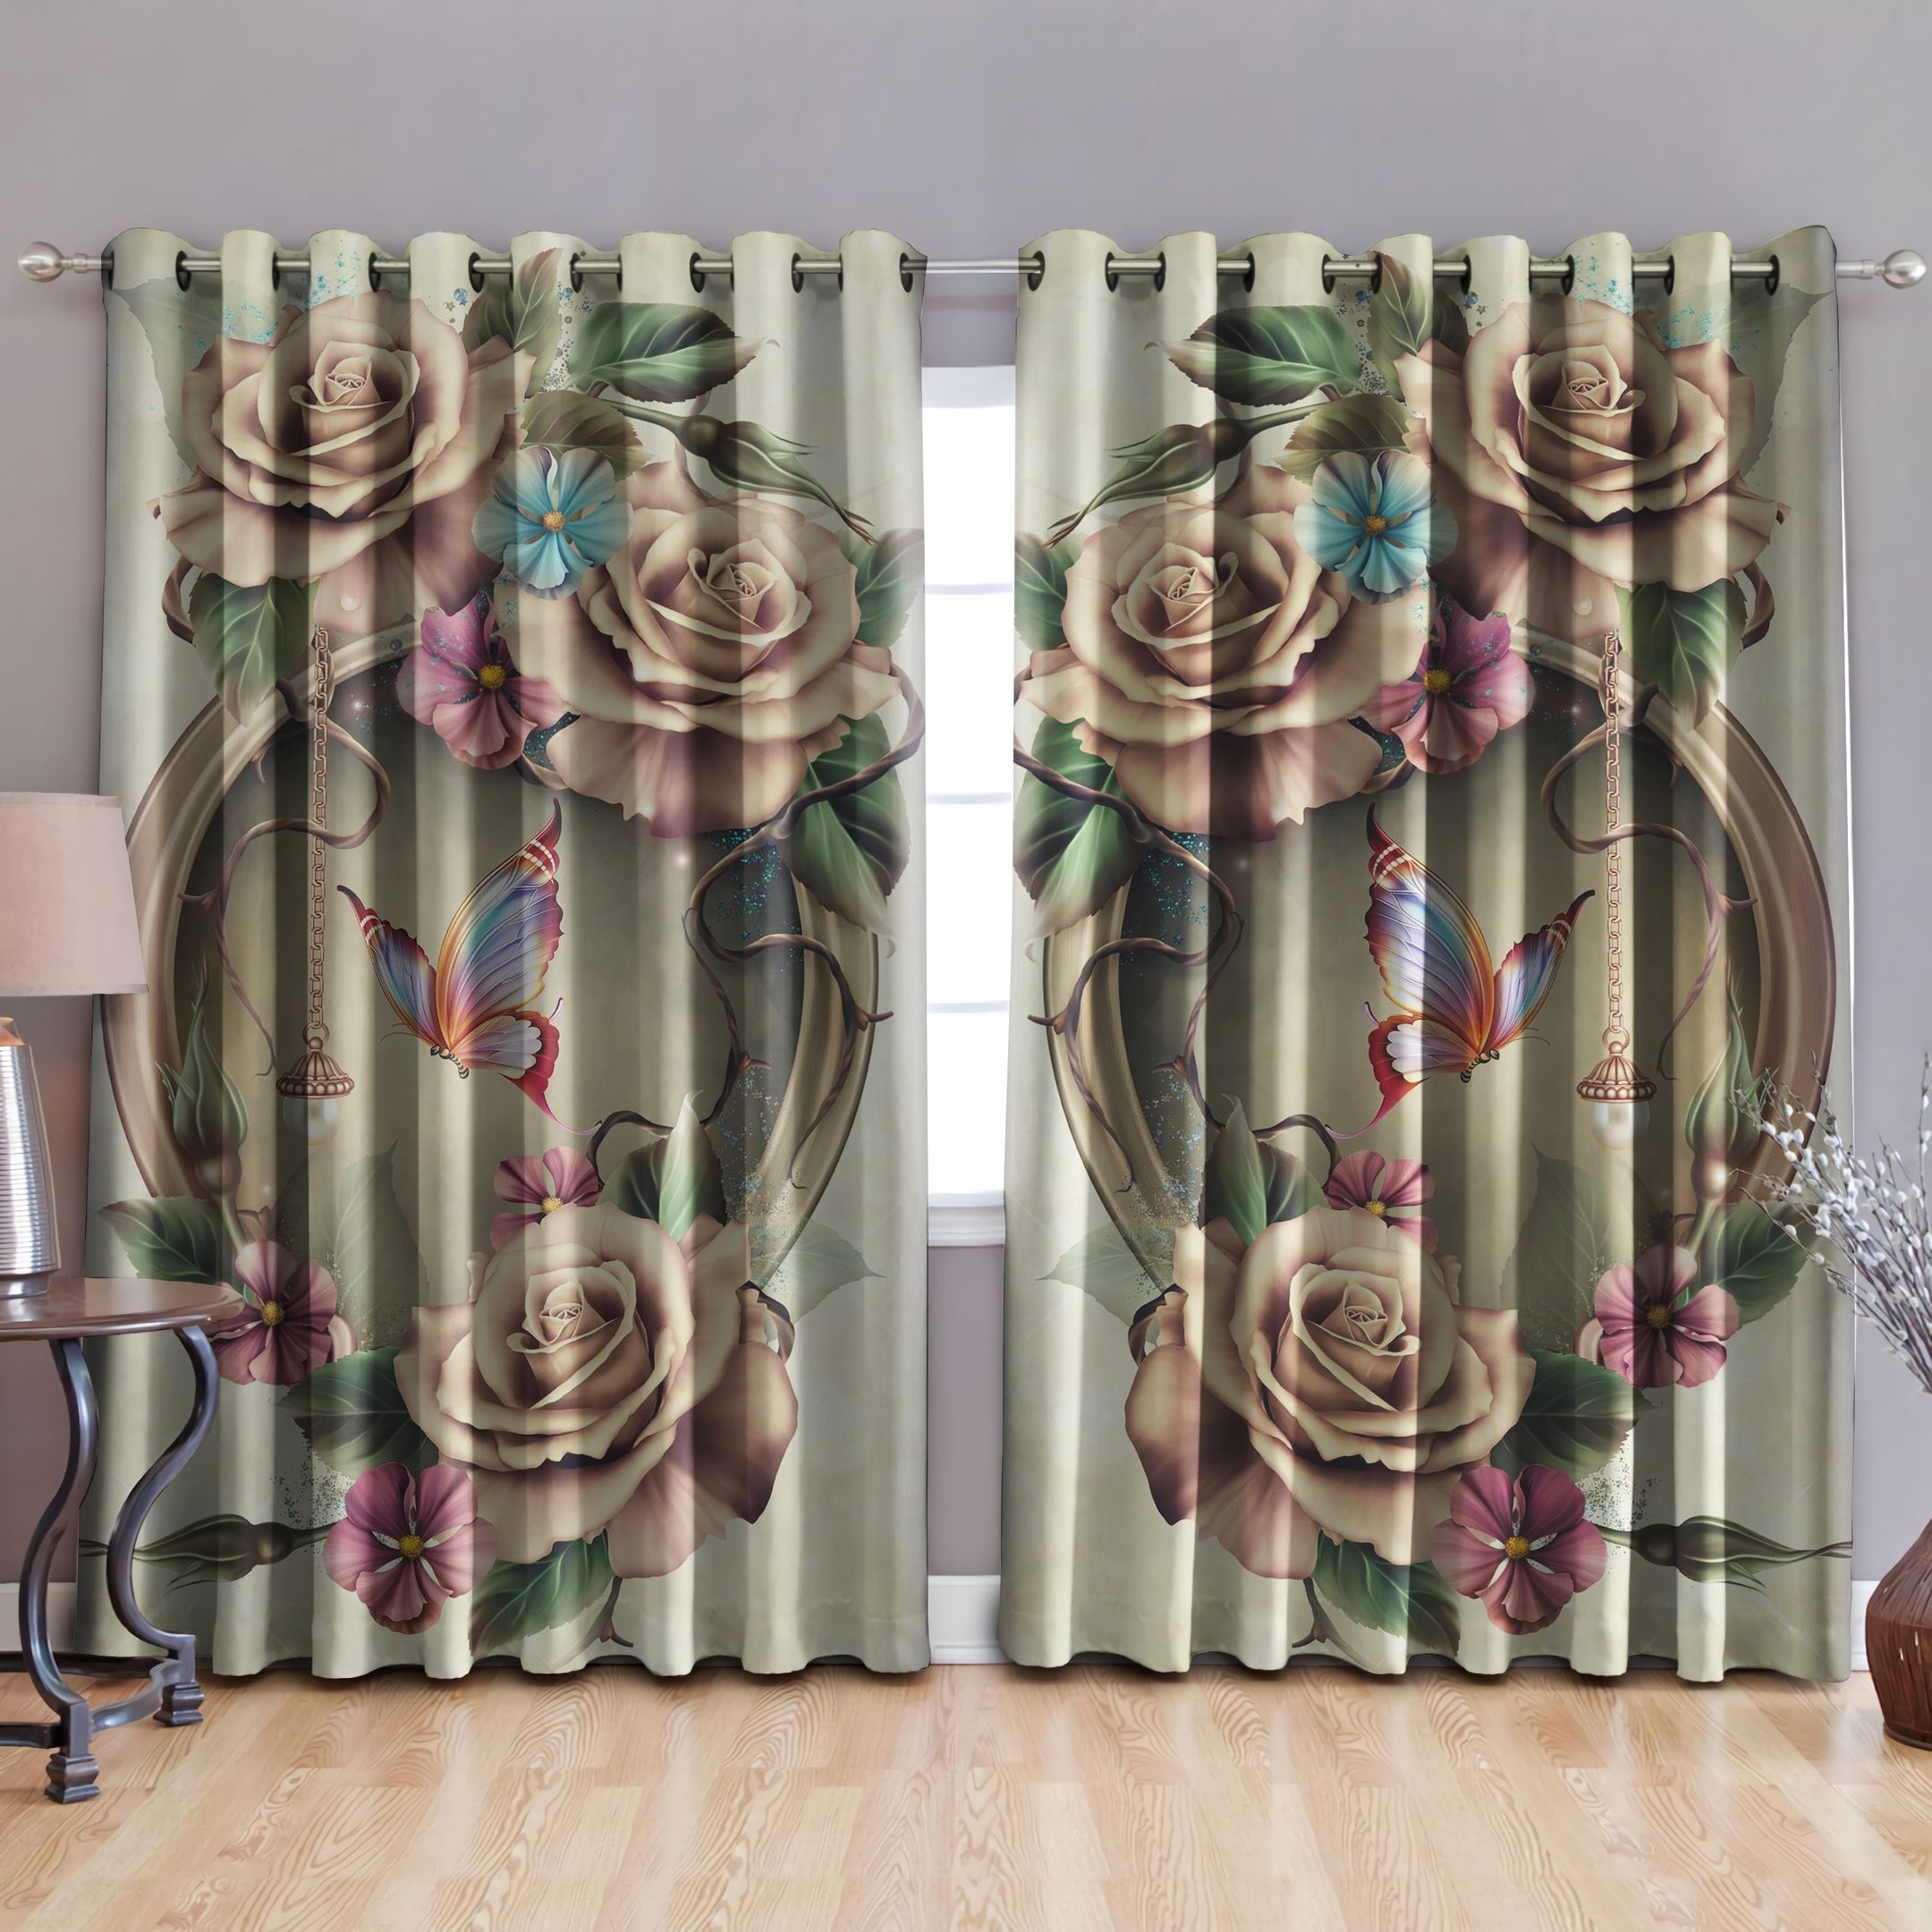 Buterfly Flowers Printed Window Curtain Home Decor